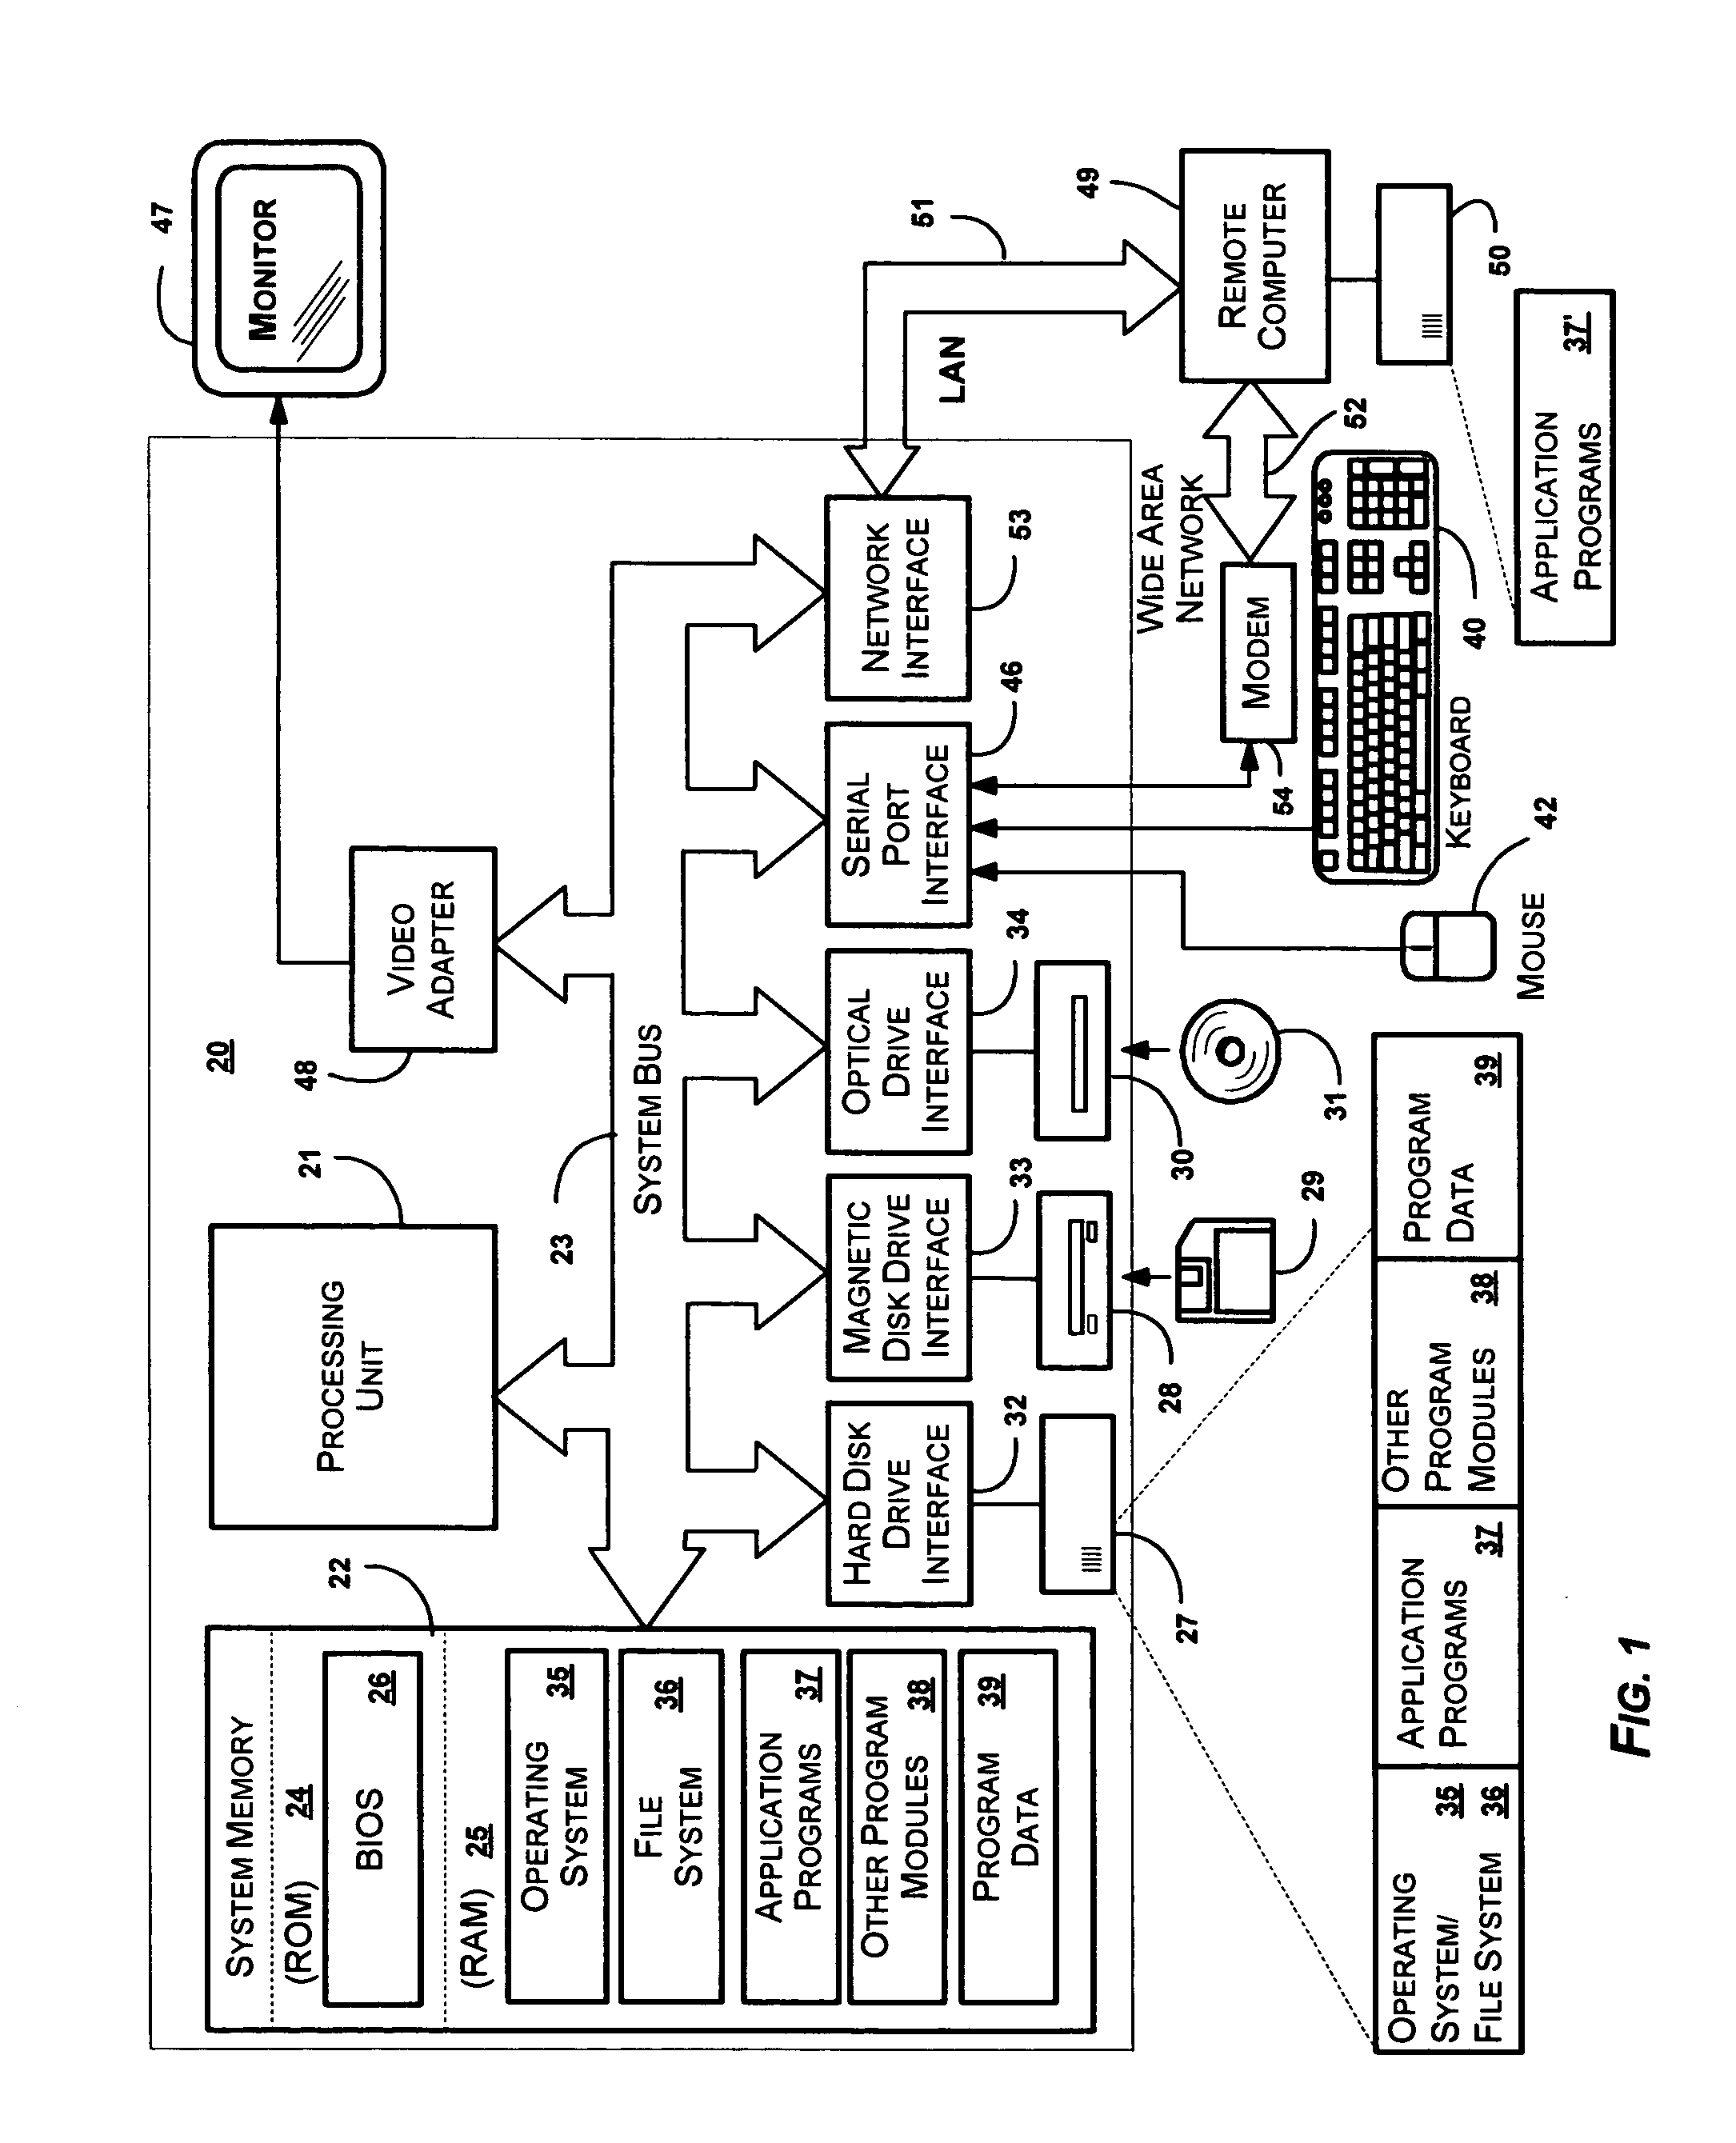 System and method for facilitating the design of a website